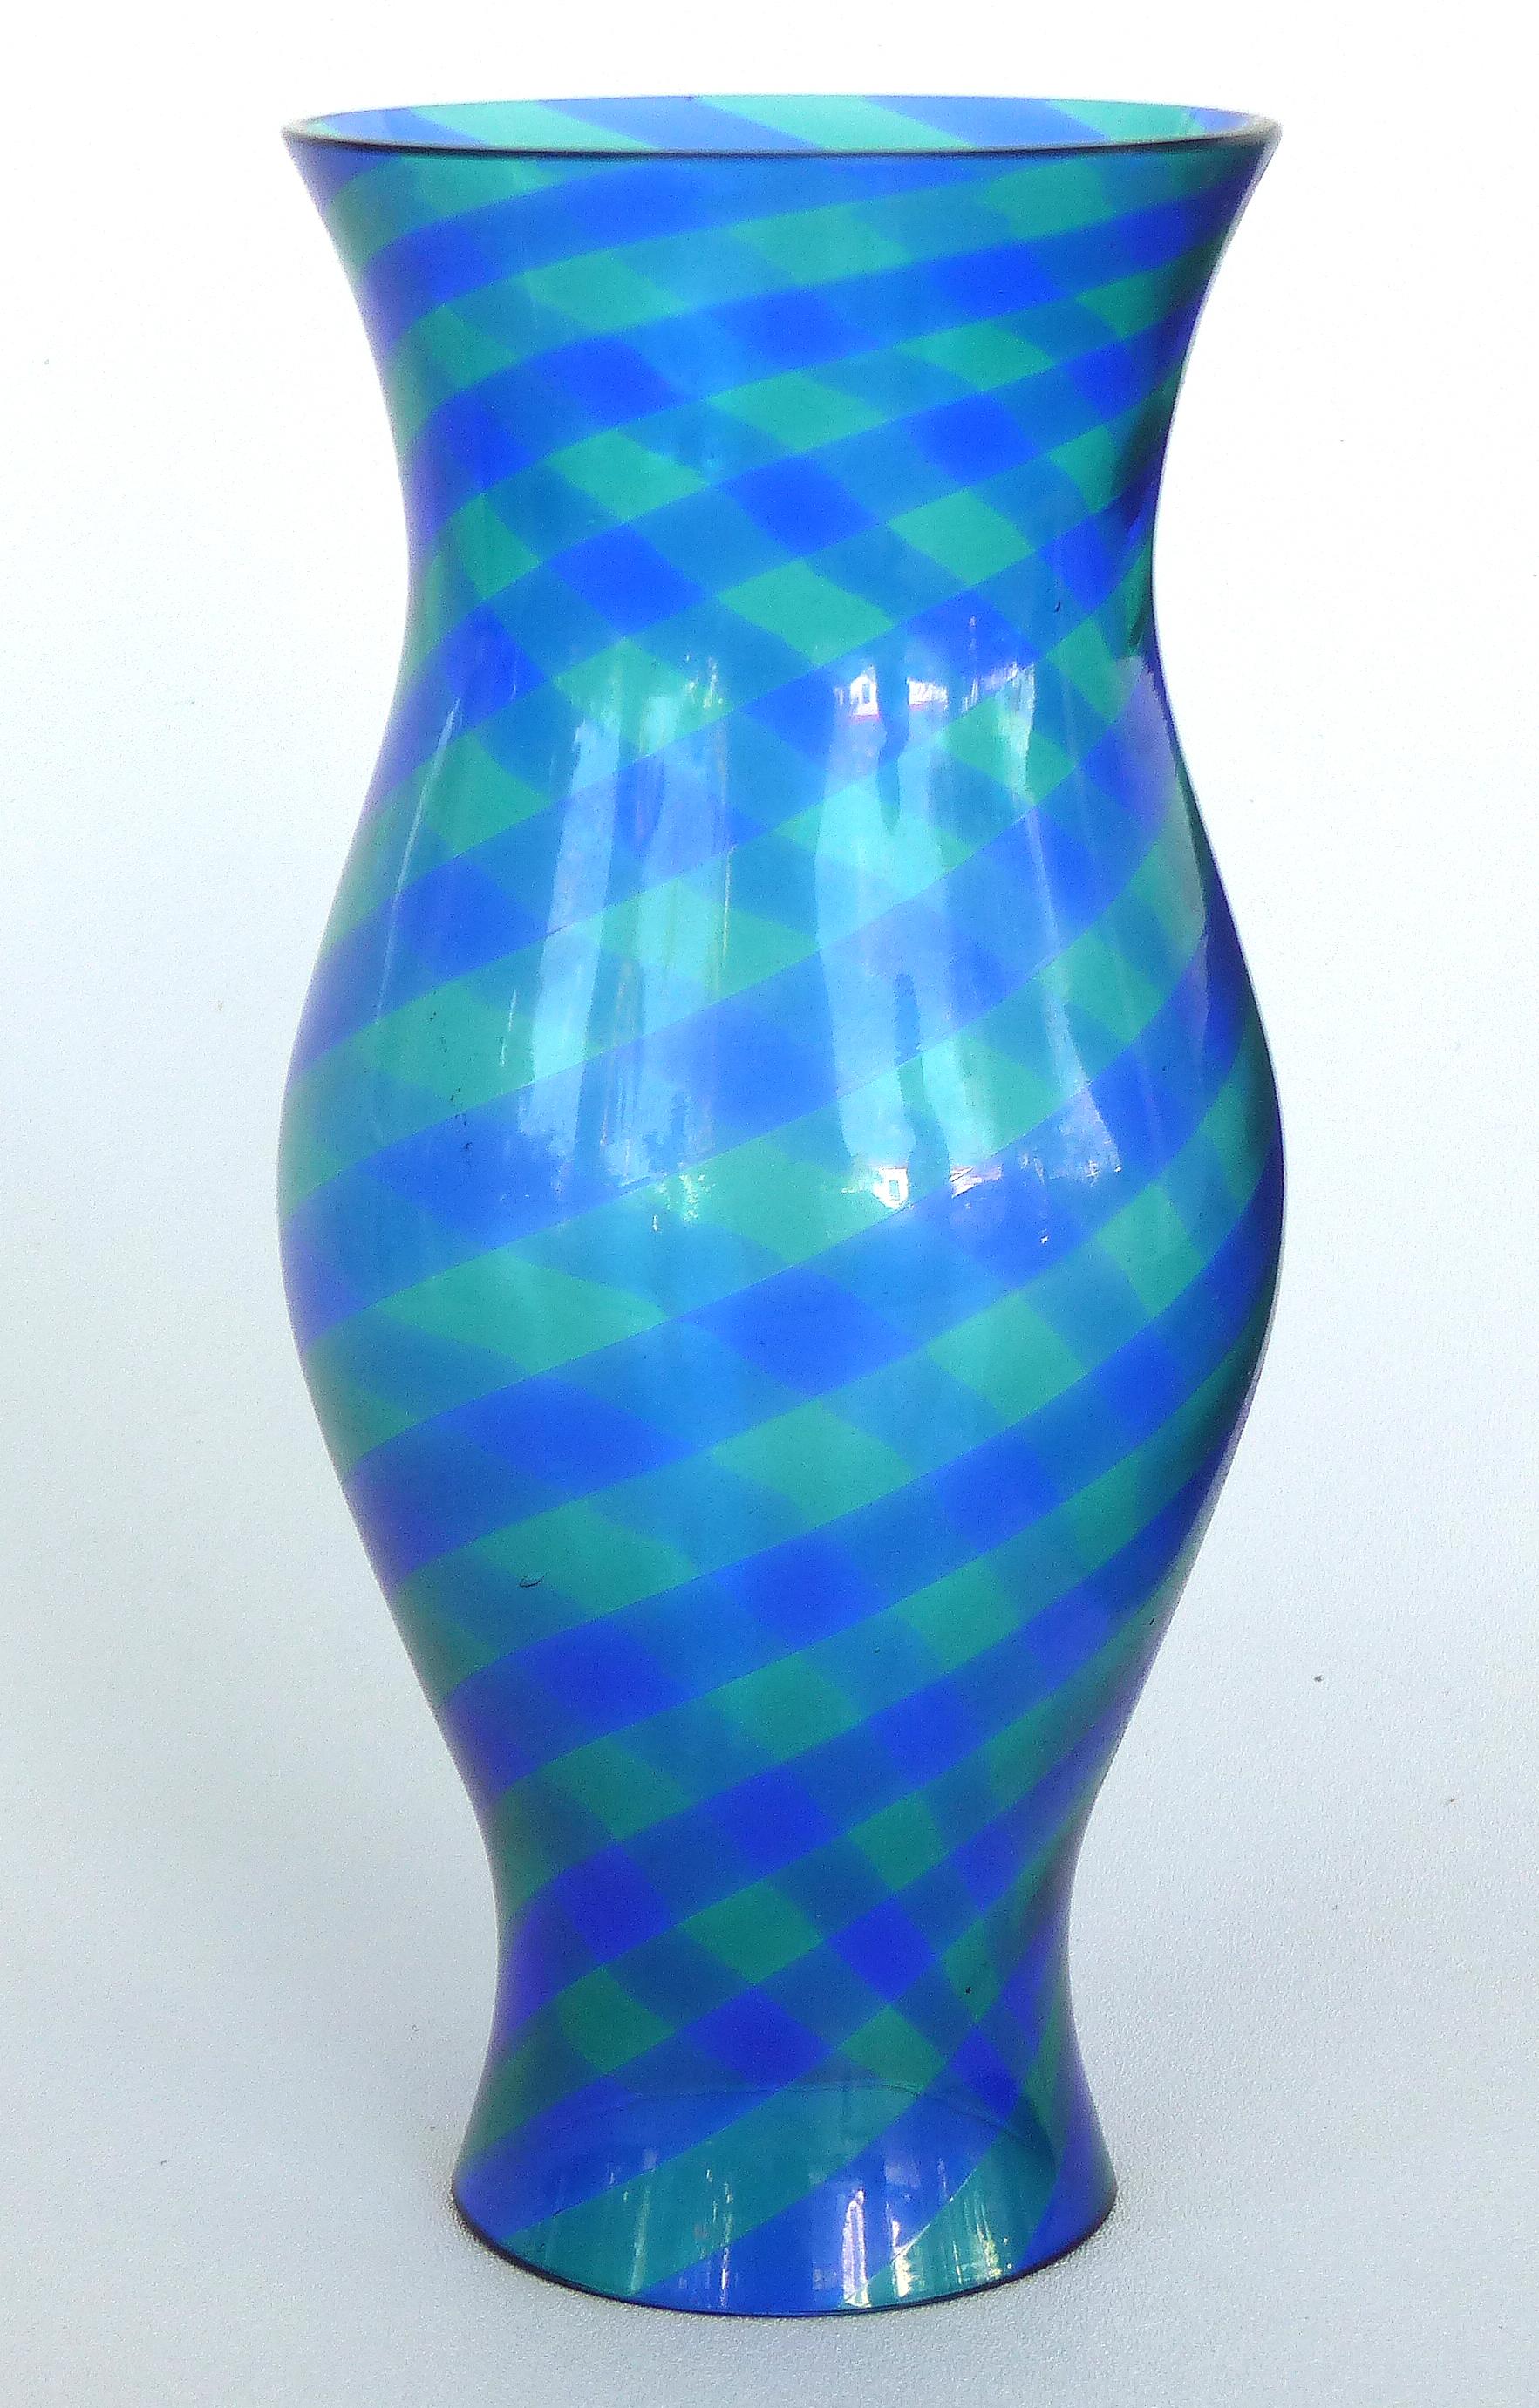 Offered for sale is a pair of blue and green blown glass hurricane shades with a swirled striped pattern.